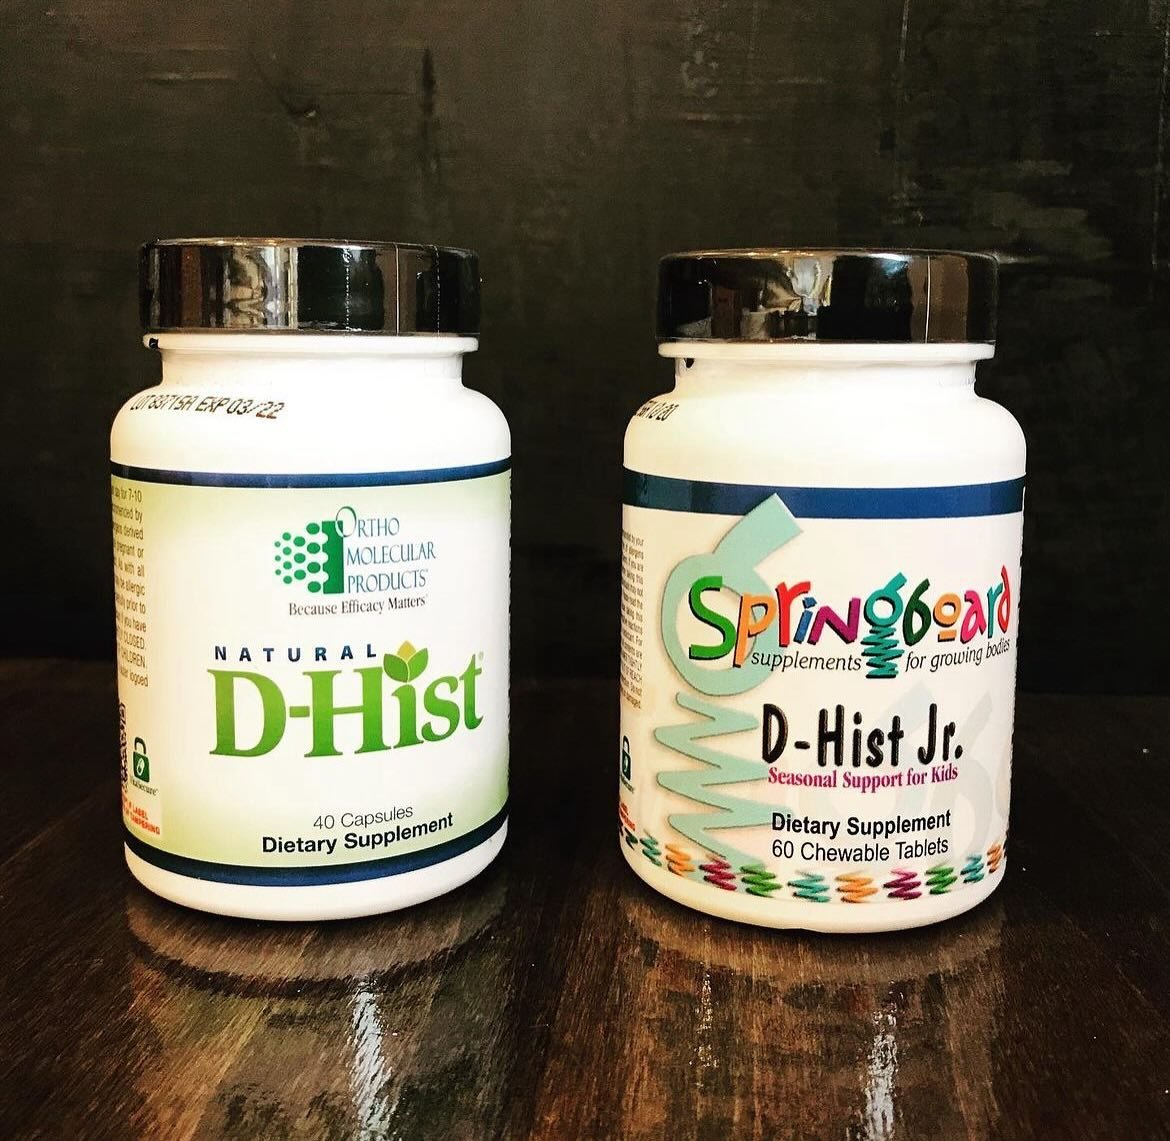 Seasonal allergies getting you down?
&bull;
&bull;

Natural D-Hist, a formula that promotes healthy nasal and sinus passages for individuals with elevated histamine and respiratory irritation, and D-Hist Jr., chewable tablets for kiddos from Ortho Mo